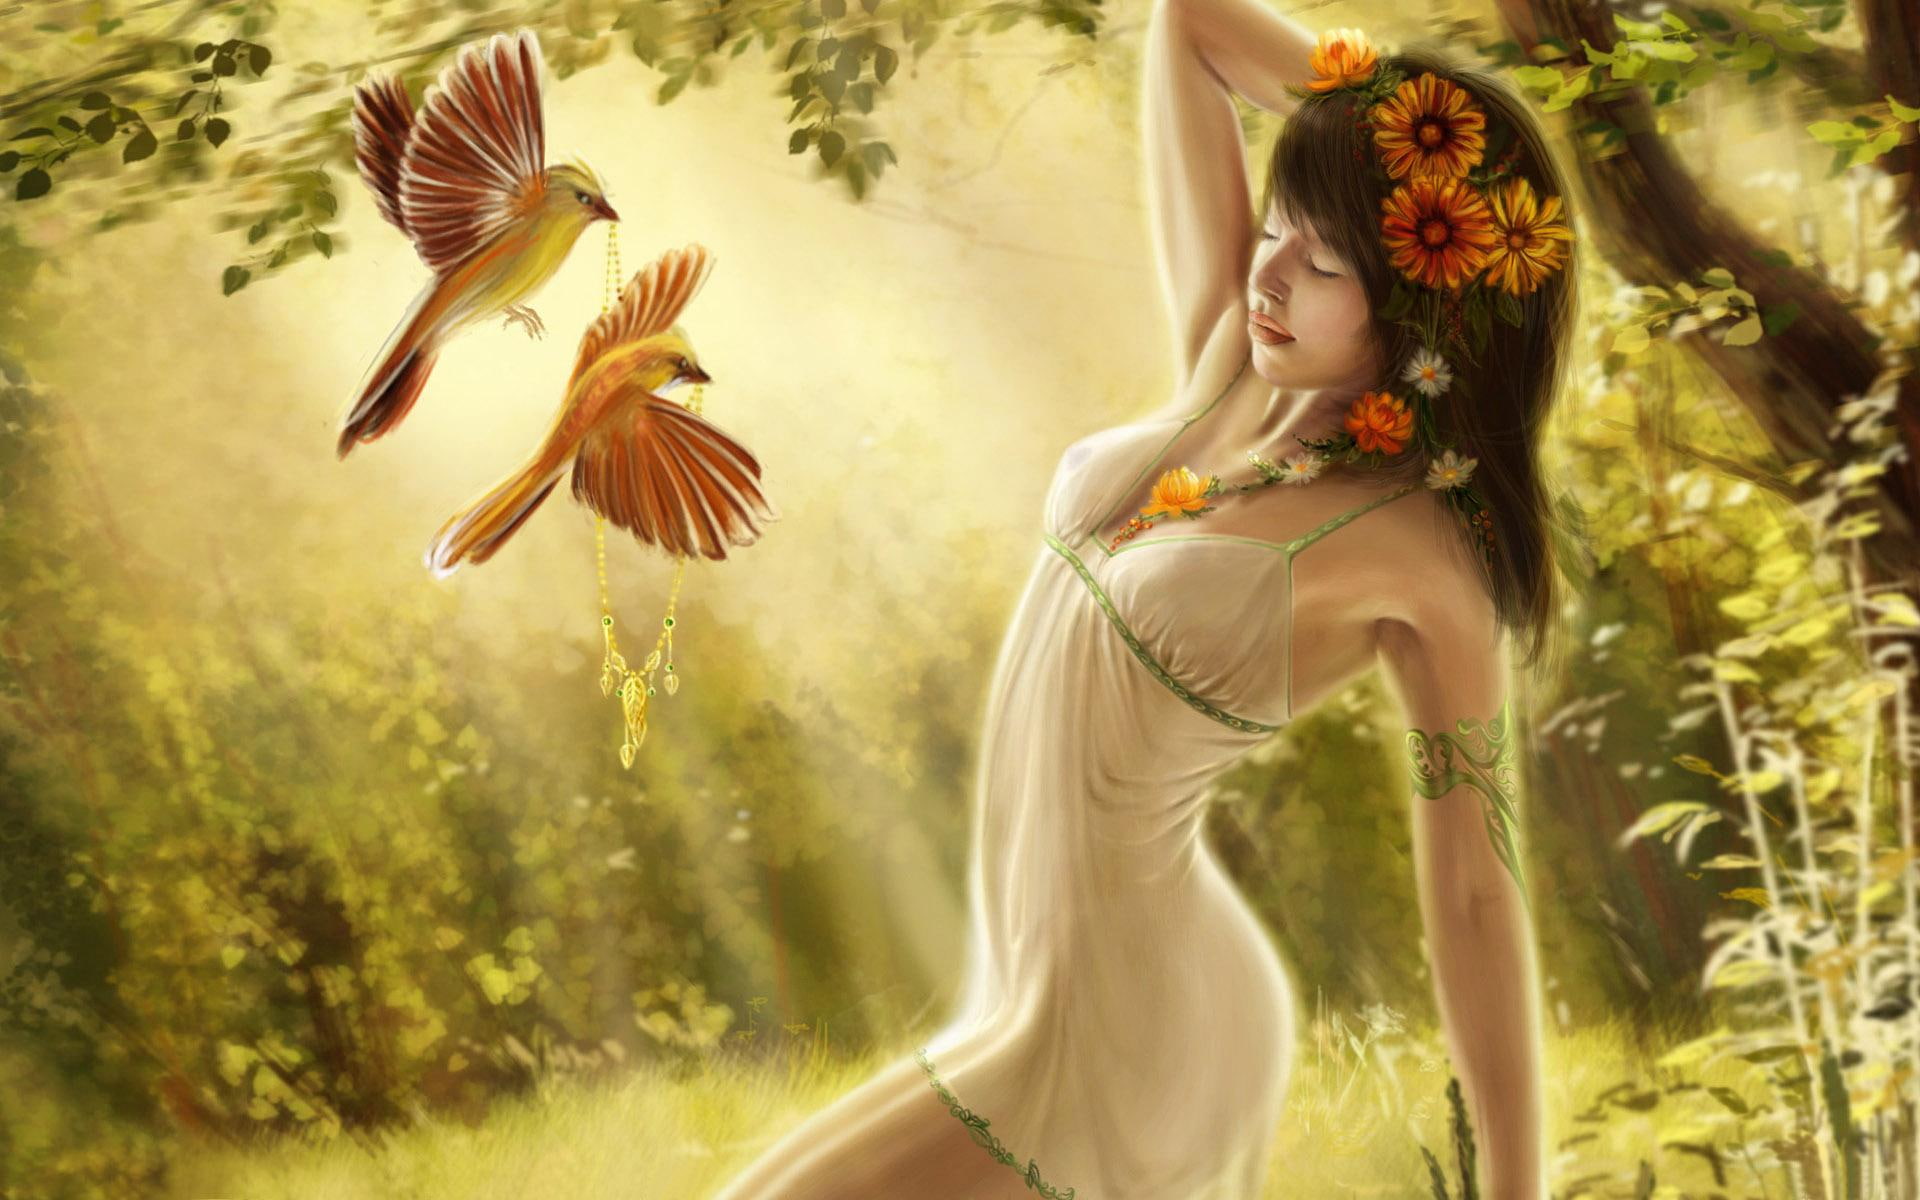 Digital Fantasy Girl Art, woman in white sheer dress and two birds painting